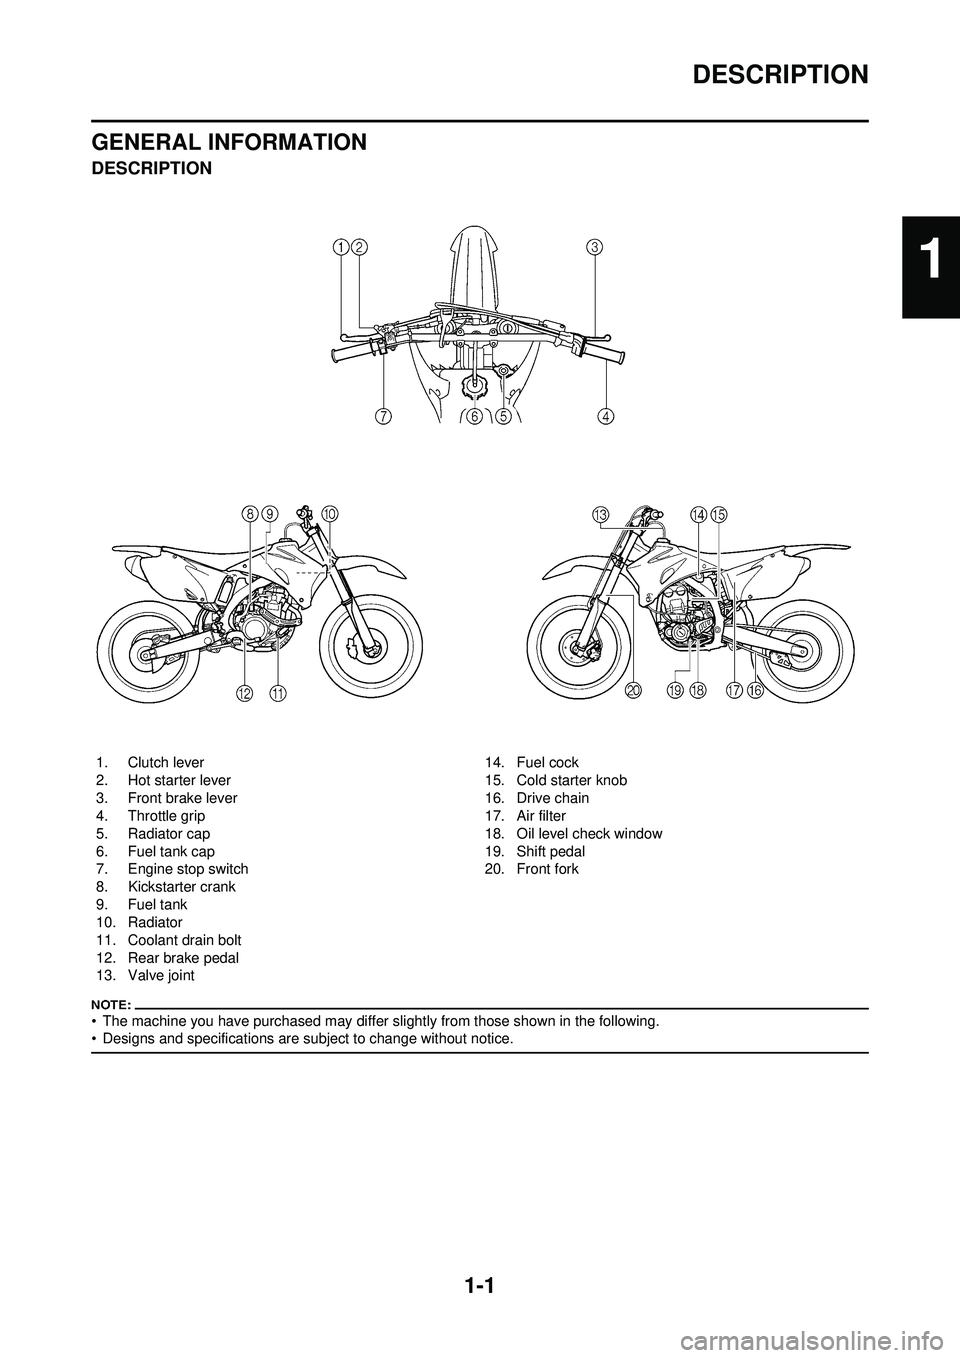 YAMAHA YZ250F 2008  Betriebsanleitungen (in German) 1-1
DESCRIPTION
GENERAL INFORMATION
DESCRIPTION
• The machine you have purchased may differ slightly from those shown in the following.
• Designs and specifications are subject to change without n